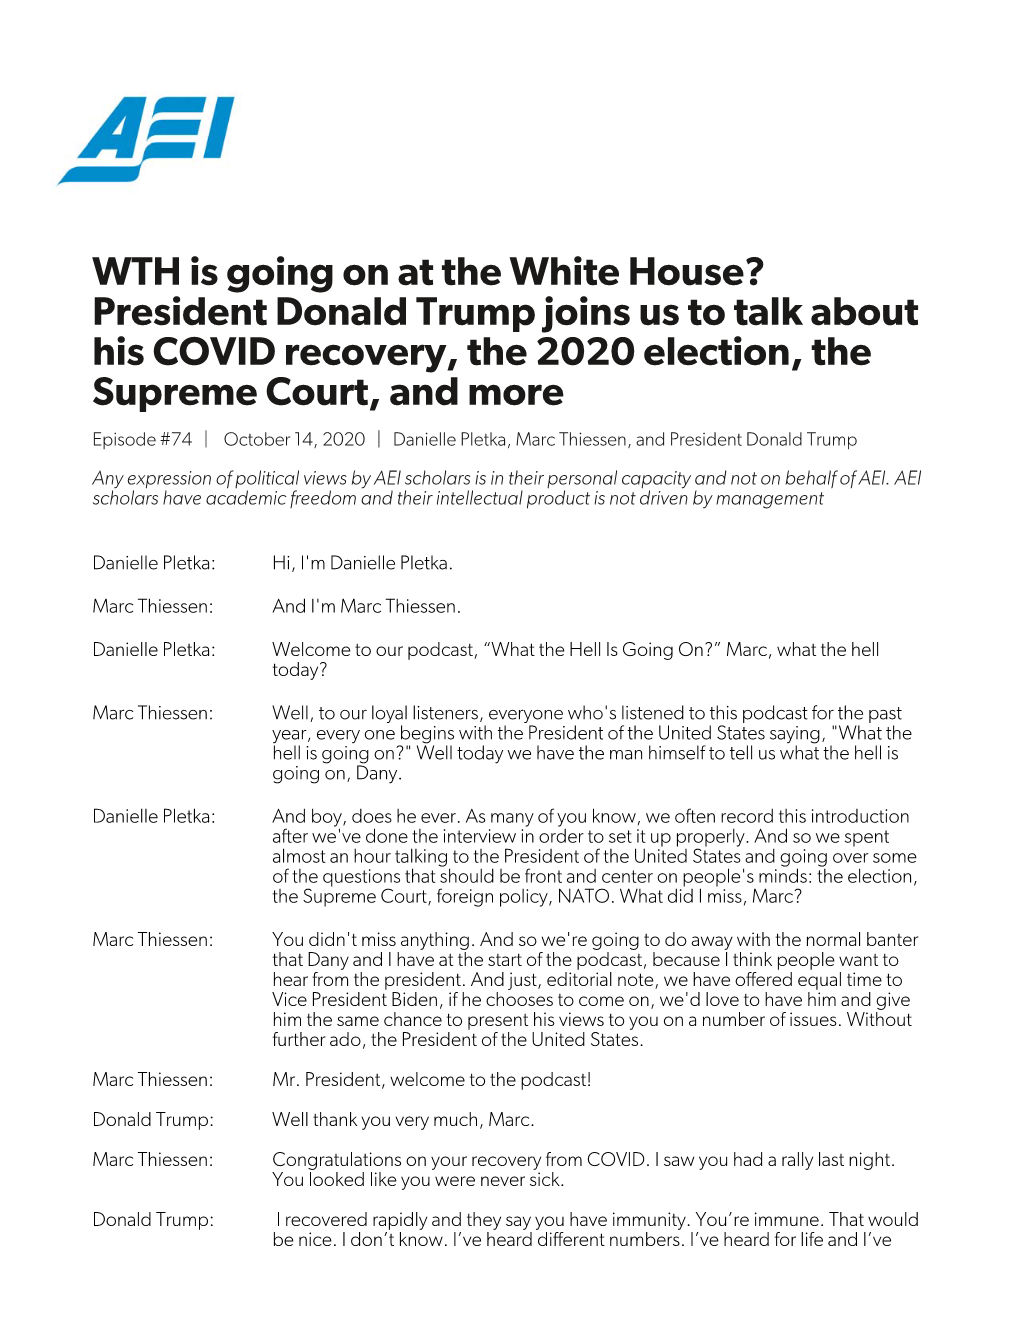 WTH Is Going on at the White House? President Donald Trump Joins Us to Talk About His COVID Recovery, the 2020 Election, the Supreme Court, and More